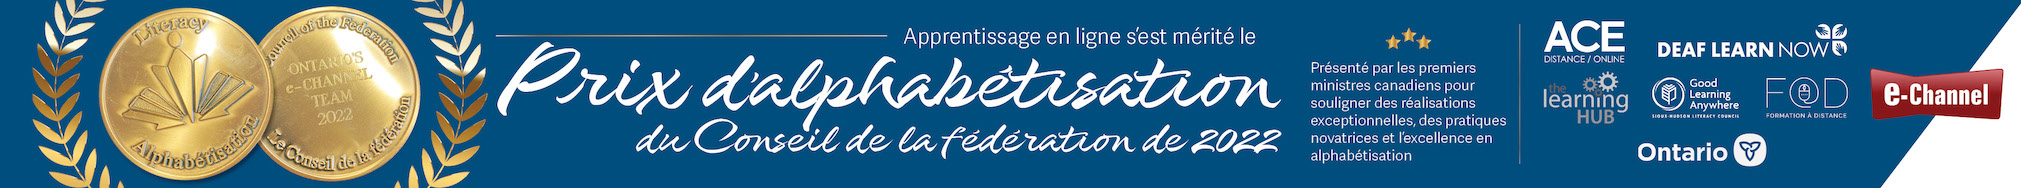 e-Channel Literacy Award banner in French